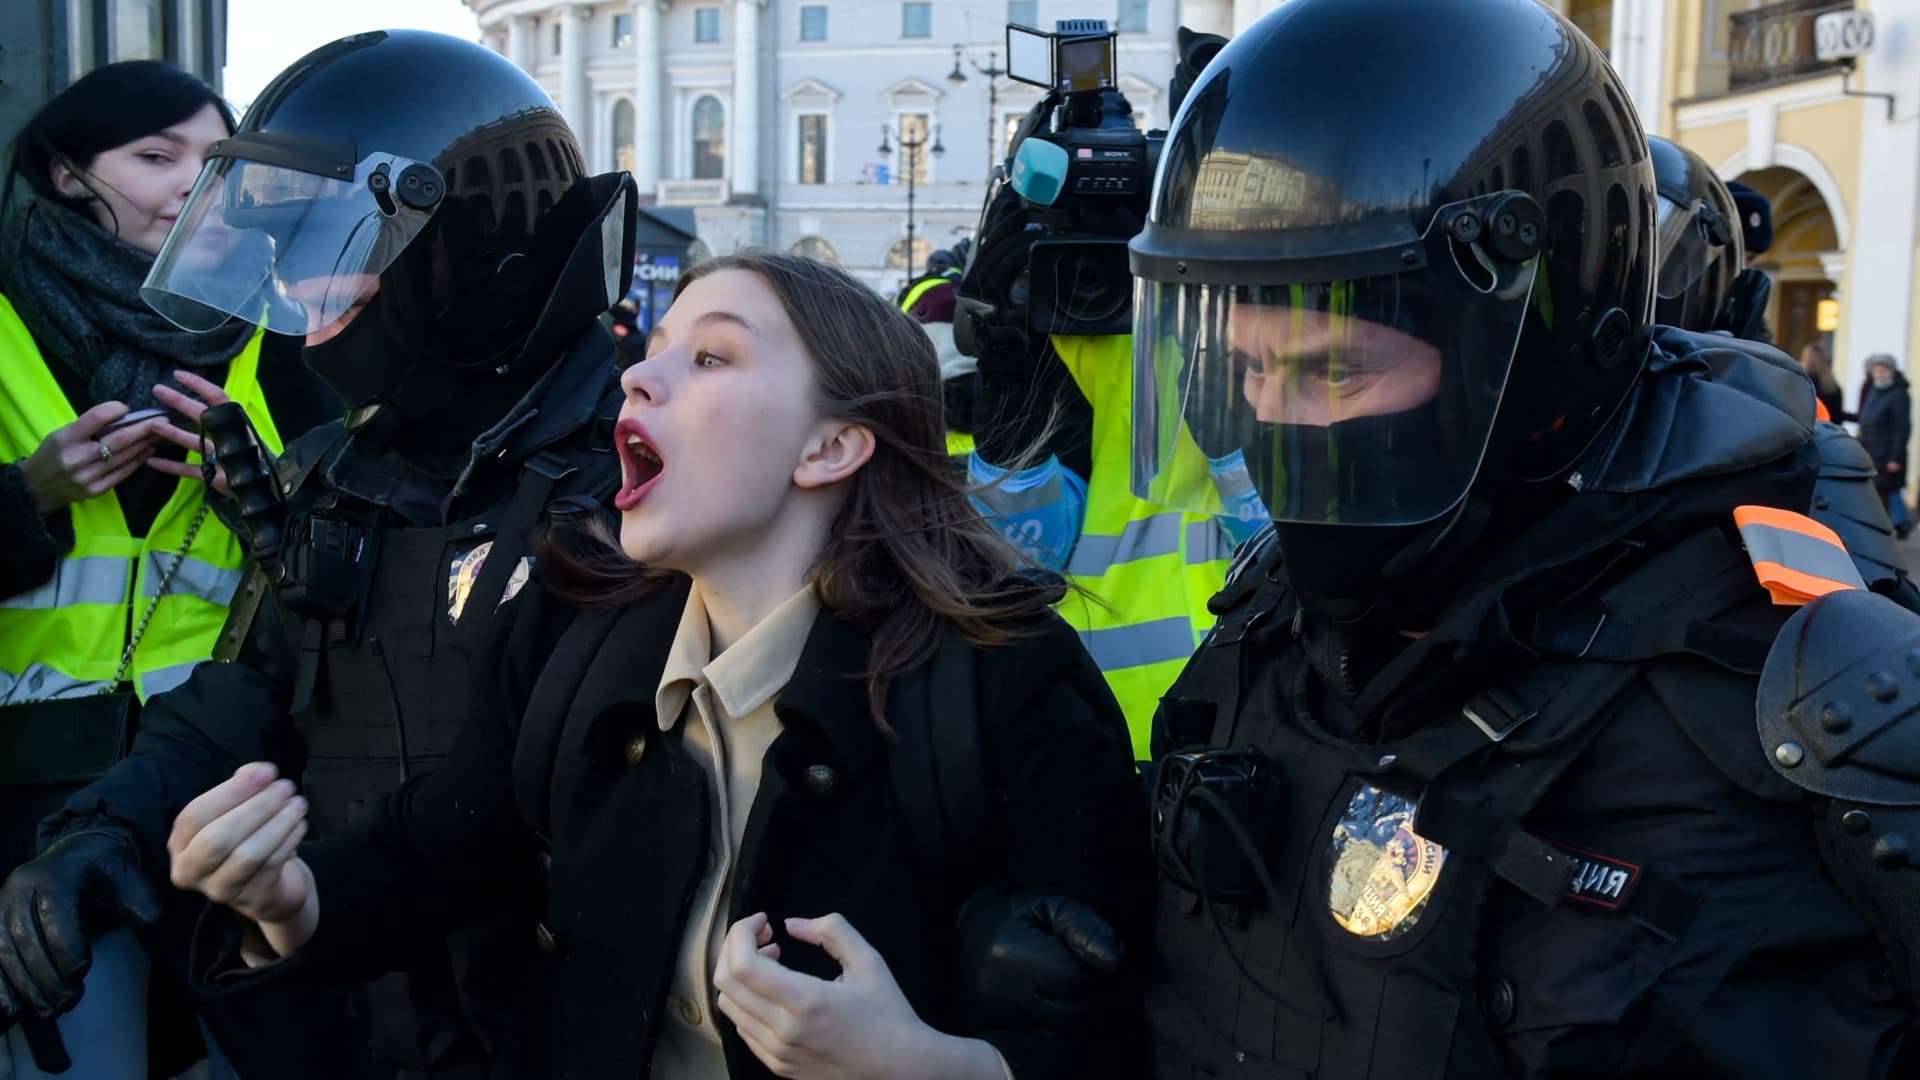 Police officers detain a woman during a protest against Russian military action in Ukraine, in central Saint Petersburg on March 13, 2022.